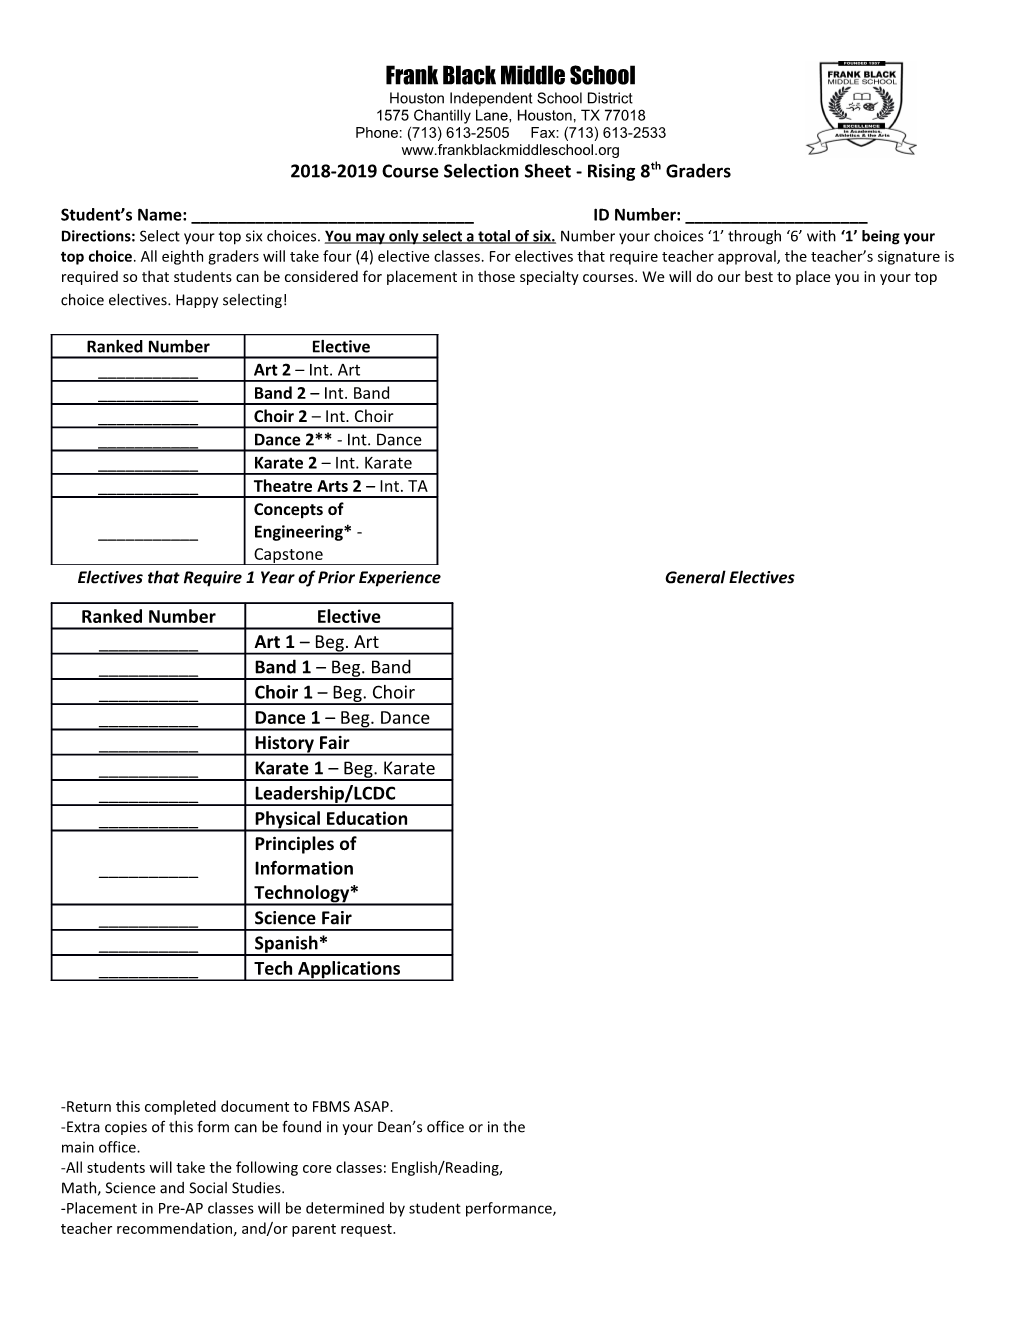 2018-2019 Course Selection Sheet - Rising 8Th Graders